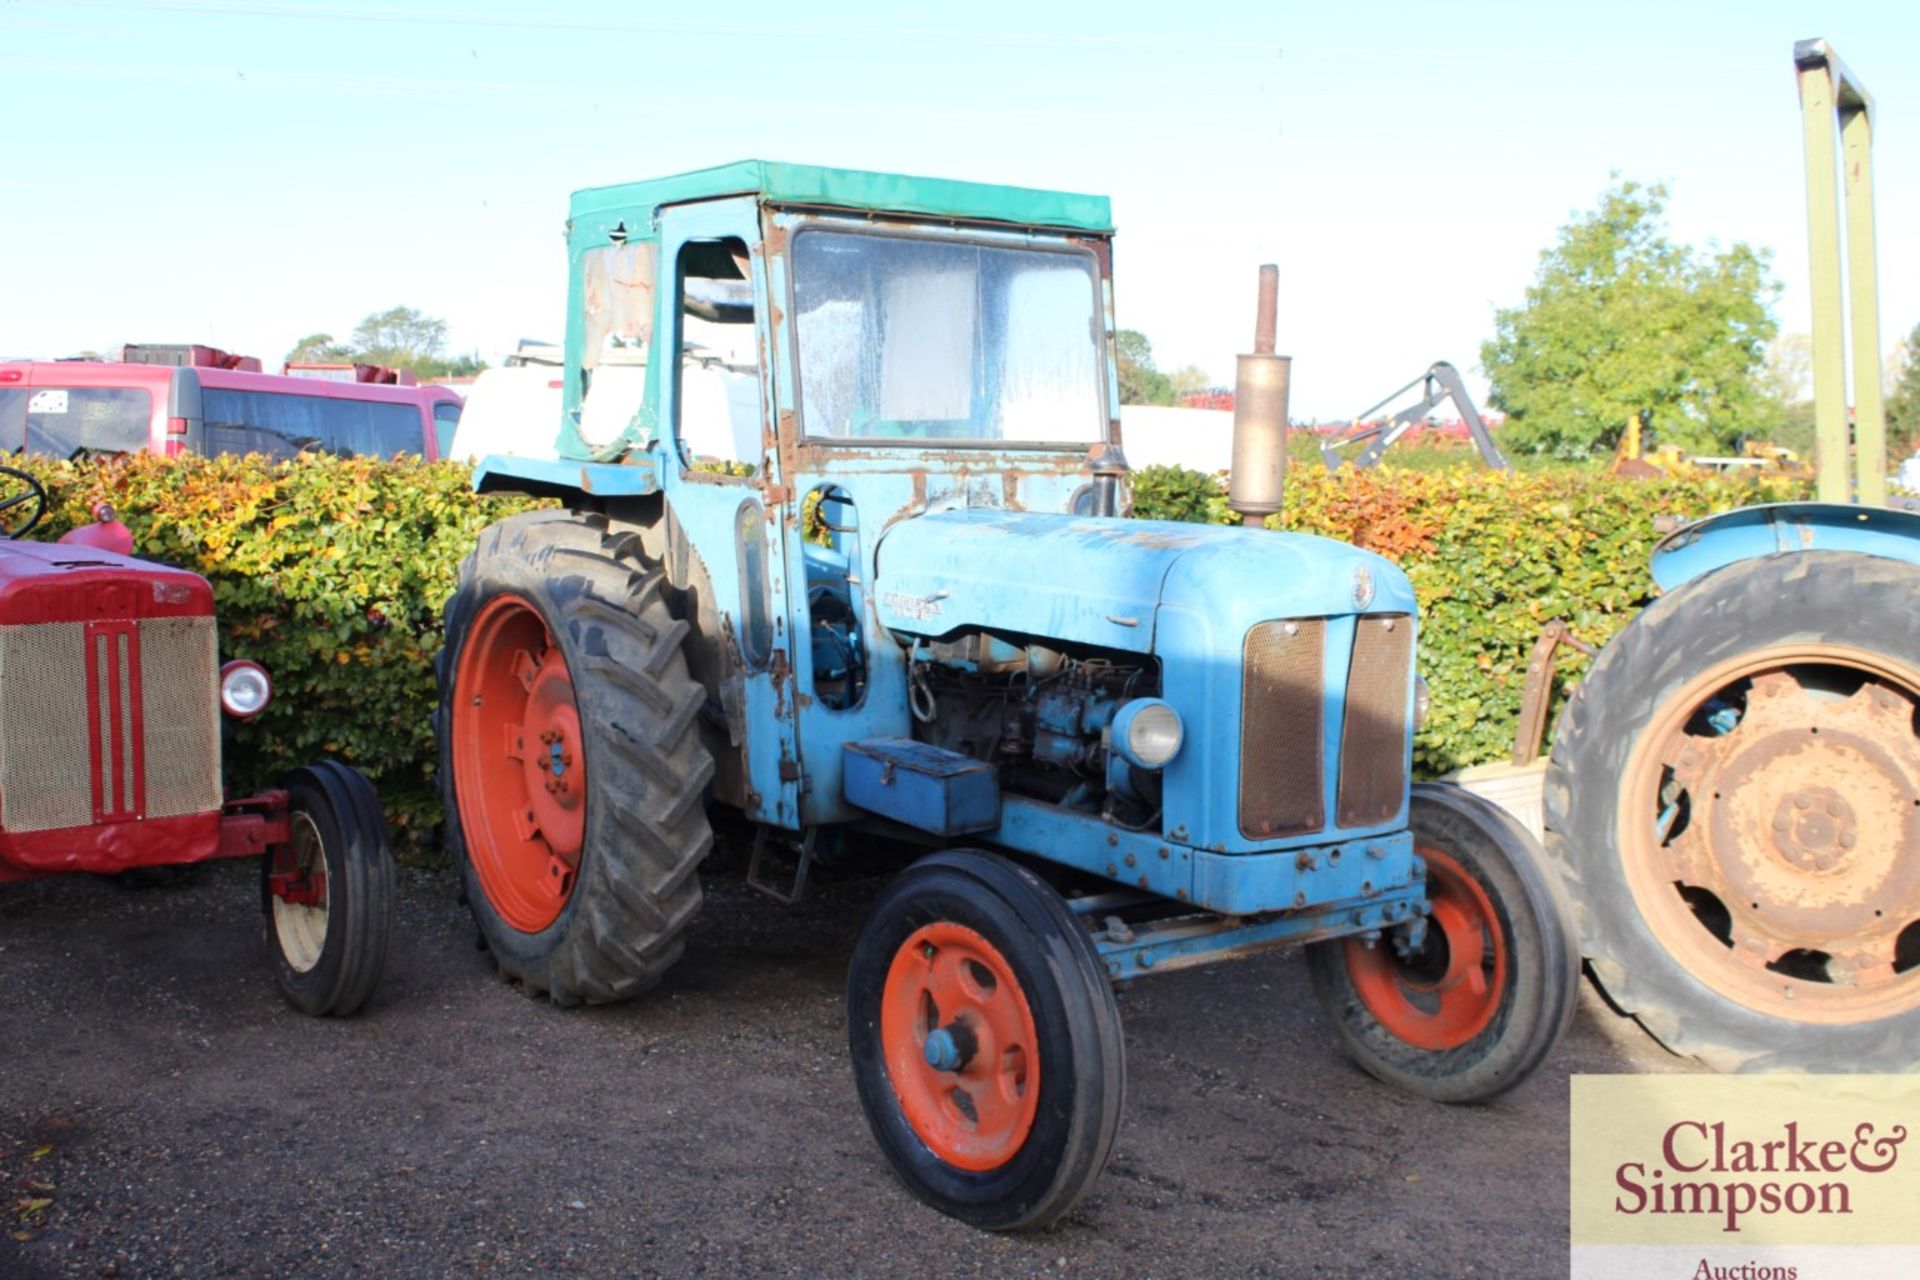 Fordson E1A Diesel Major 2WD tractor. 12.4/11-36 rear wheels and tyres @ 70%. With Lambourne cab. V